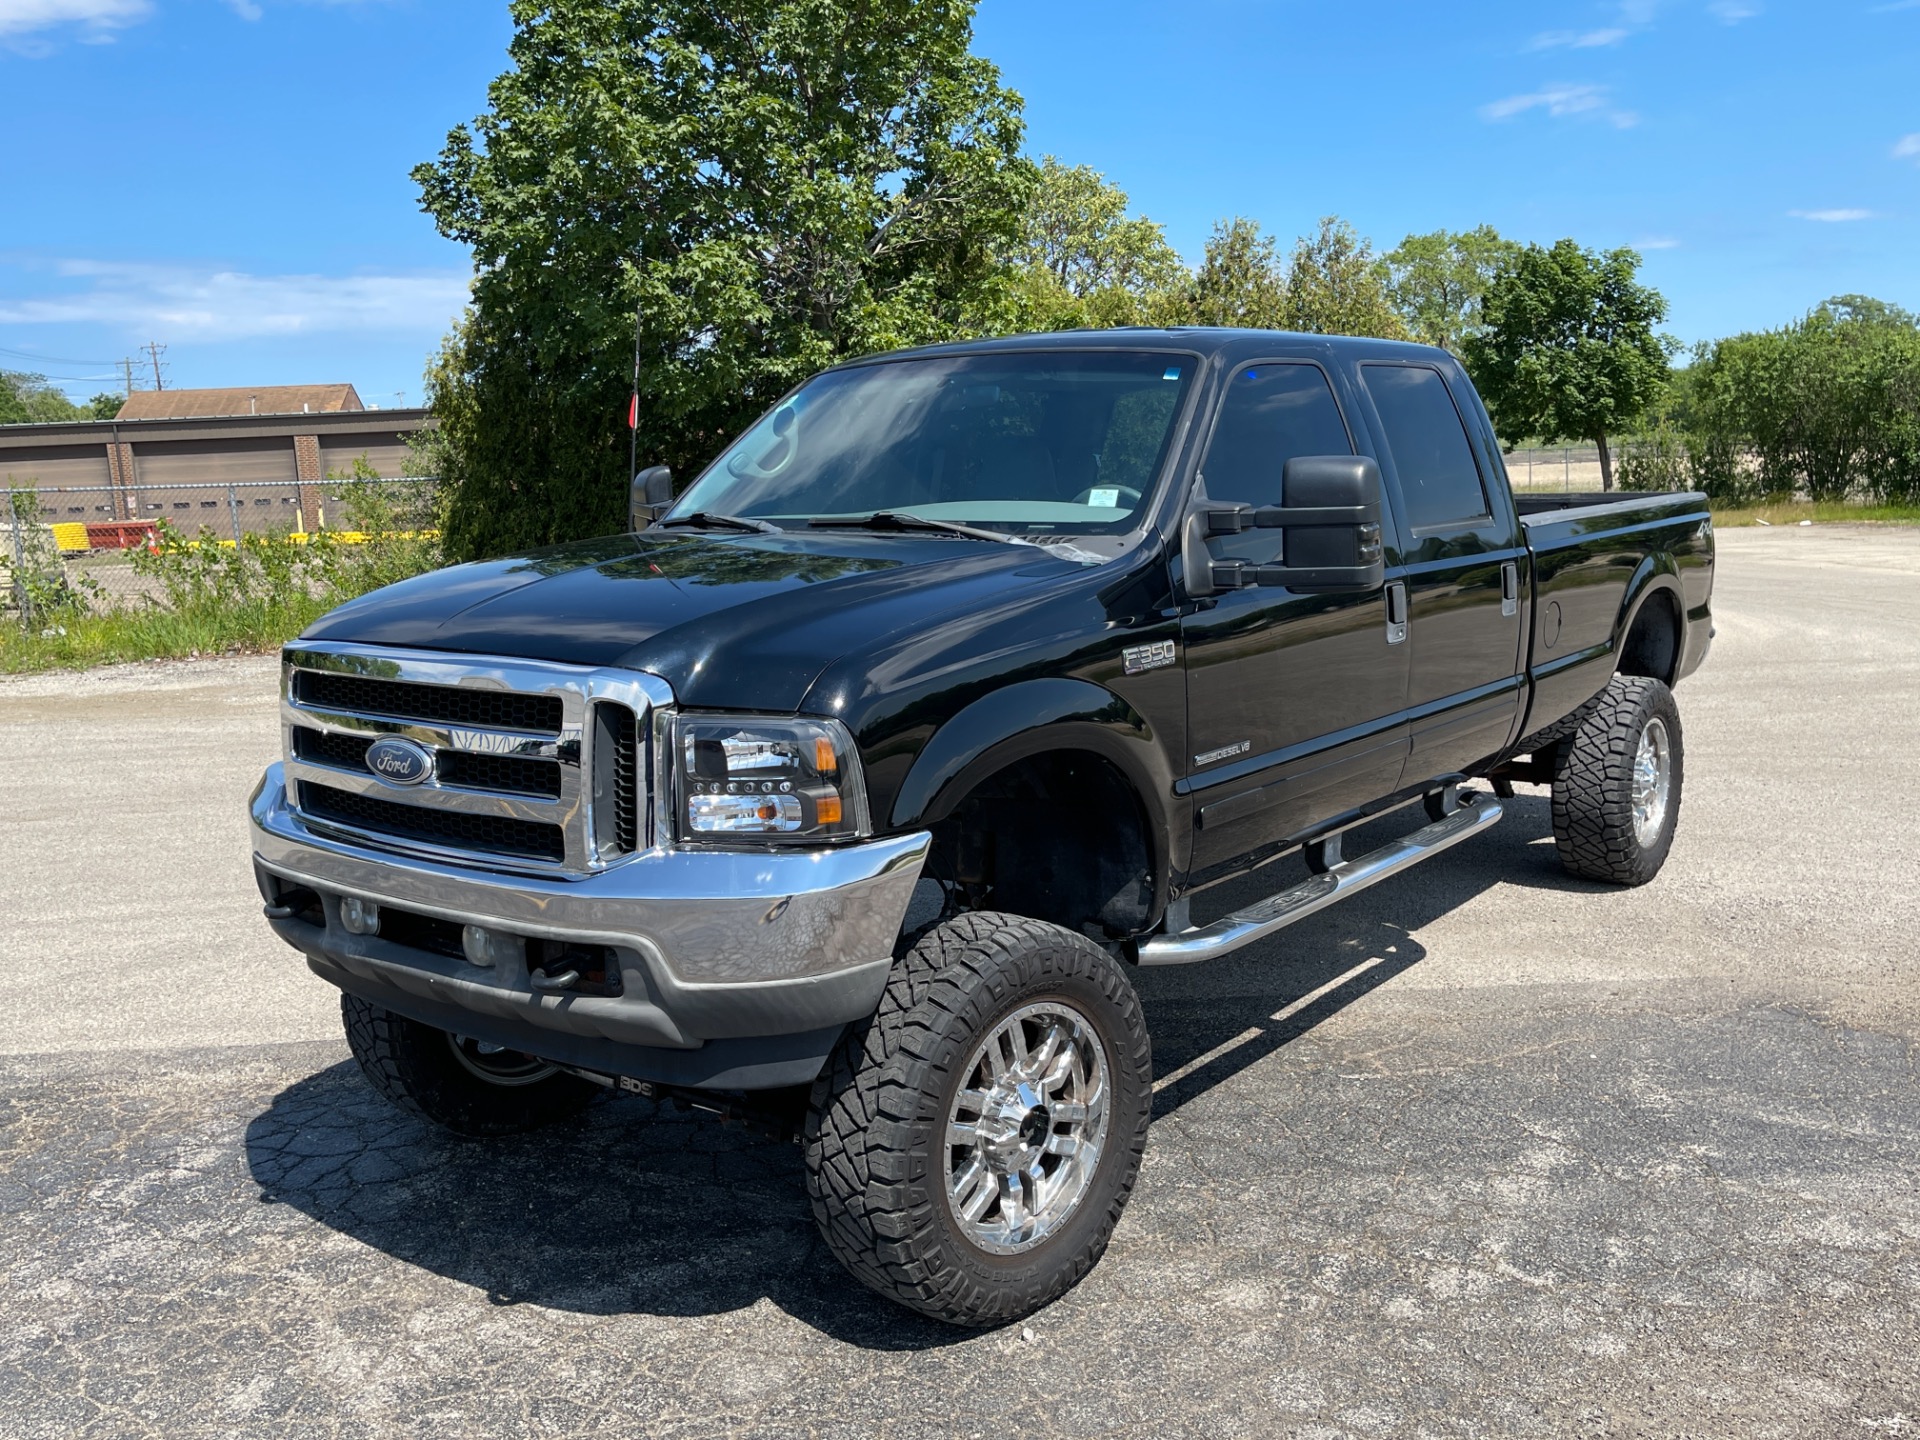 Used 2002 Ford F350 Super Duty Lifted Pickup - SEE VIDEO For Sale (Sold) |  North Shore Classics Stock #02467CV